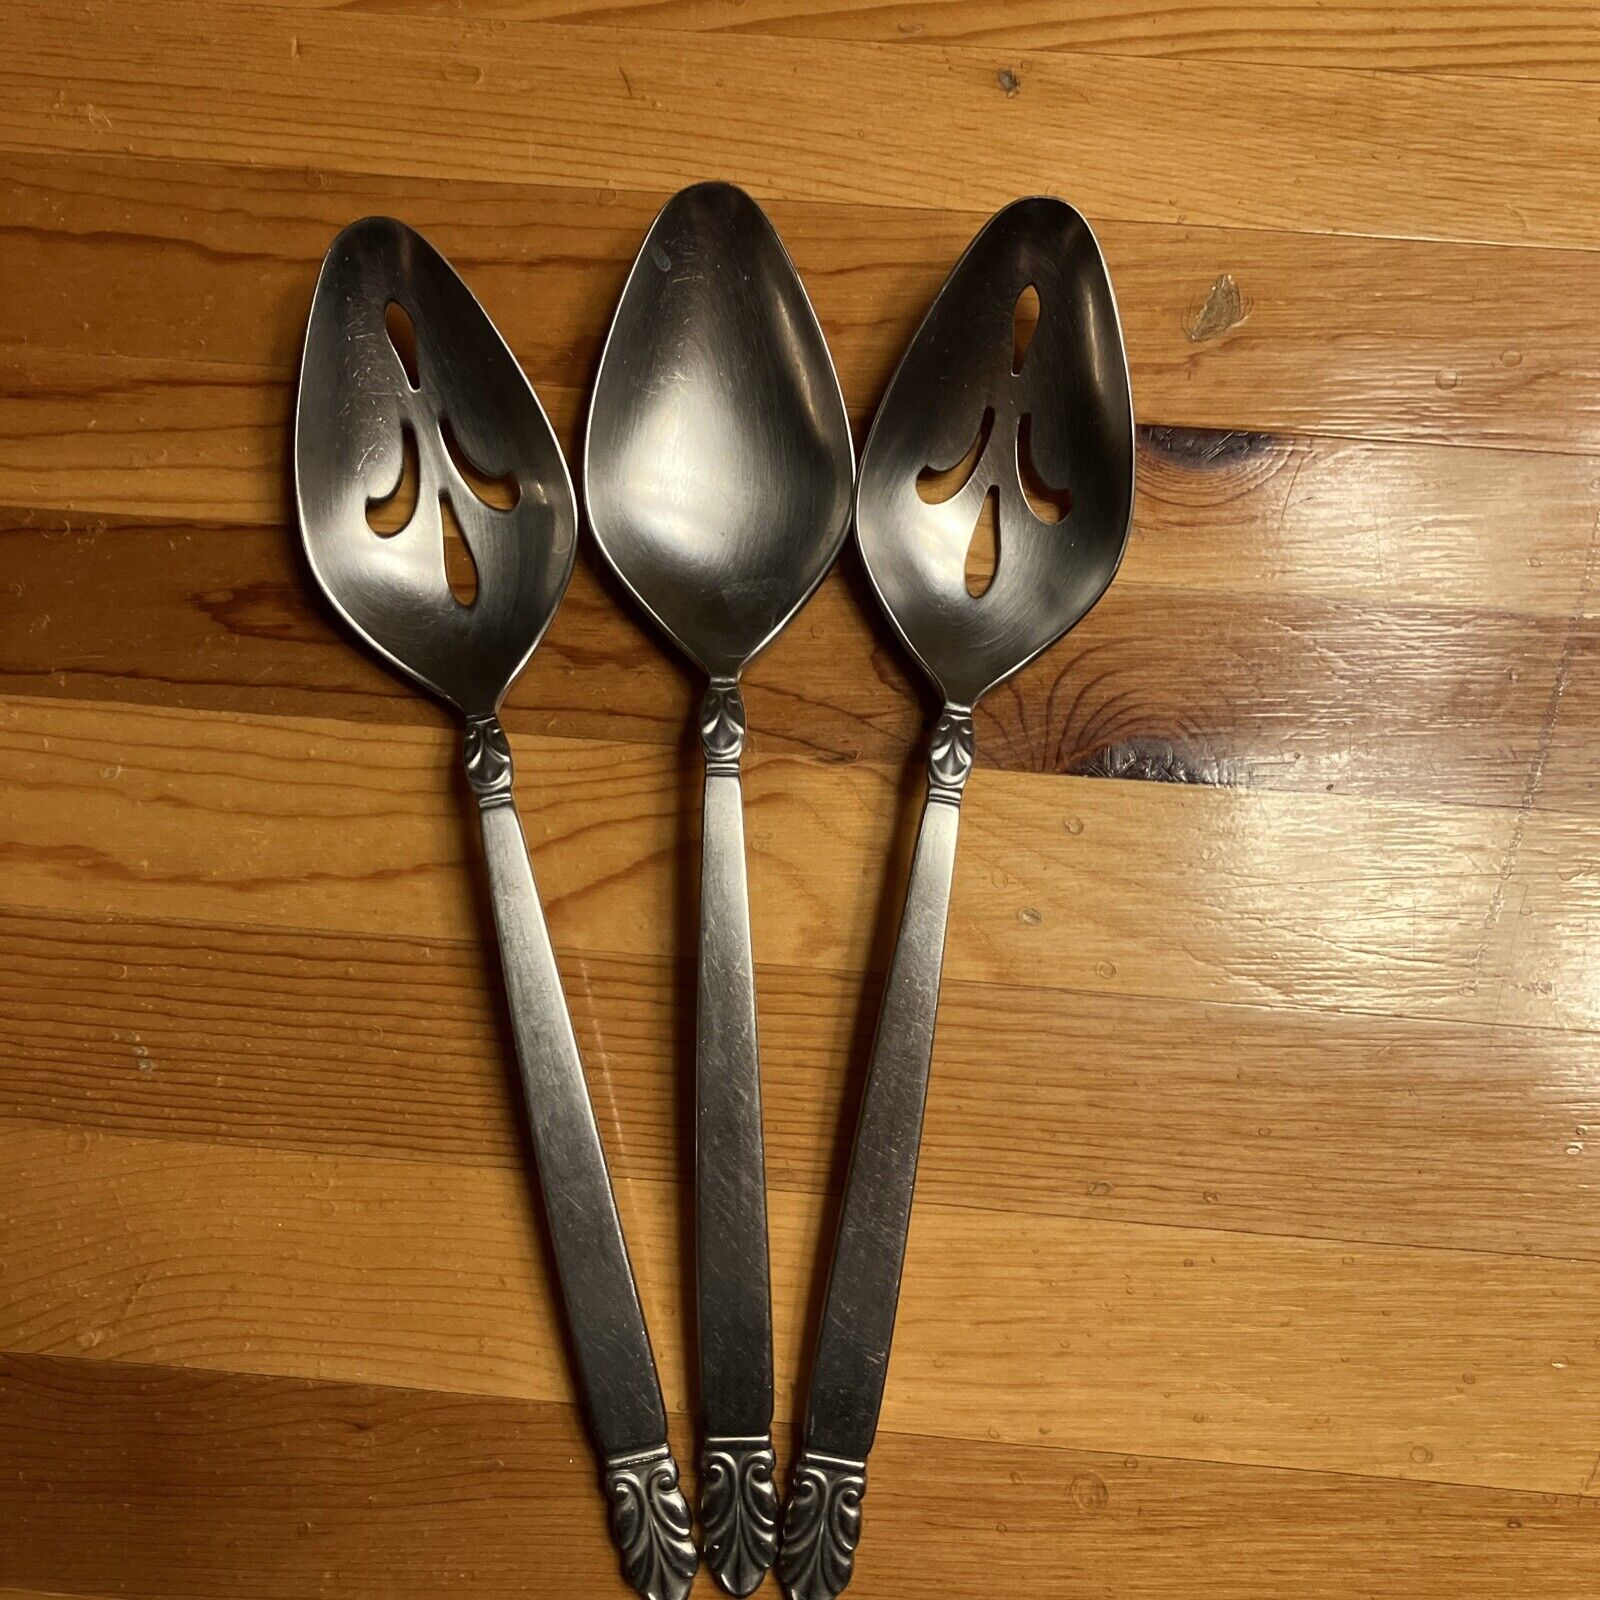 Set of 3 NORSE International Deluxe Stainless Serving Spoons Slotted Spoon